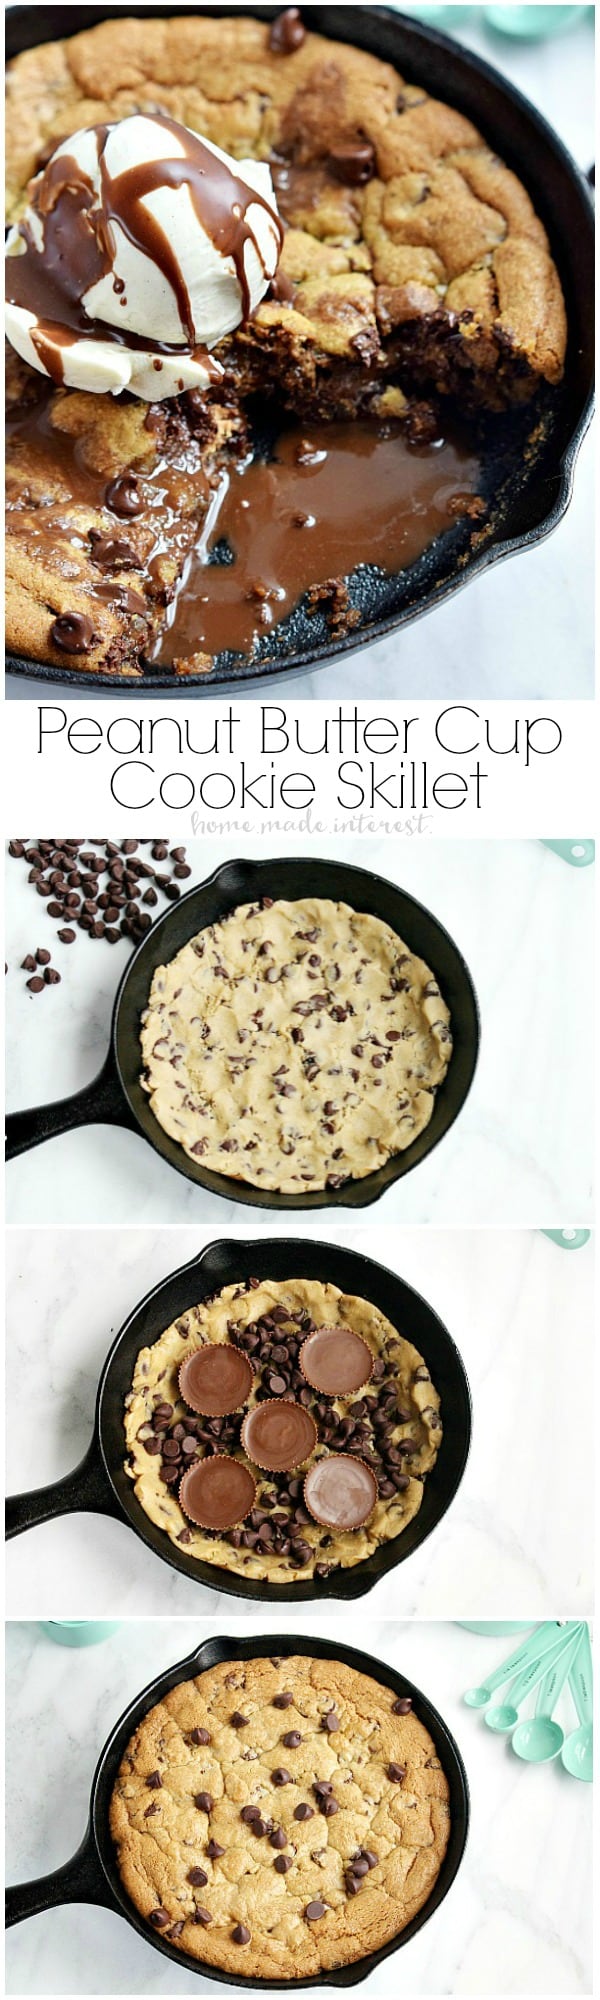 This Peanut butter cup cookie skillet is super easy to make and it is a dessert your whole family will love. Chocolate Chip cookie dough, peanut butter cups, and chocolate chips are melted together in a mini skillet for a dessert made for two. 